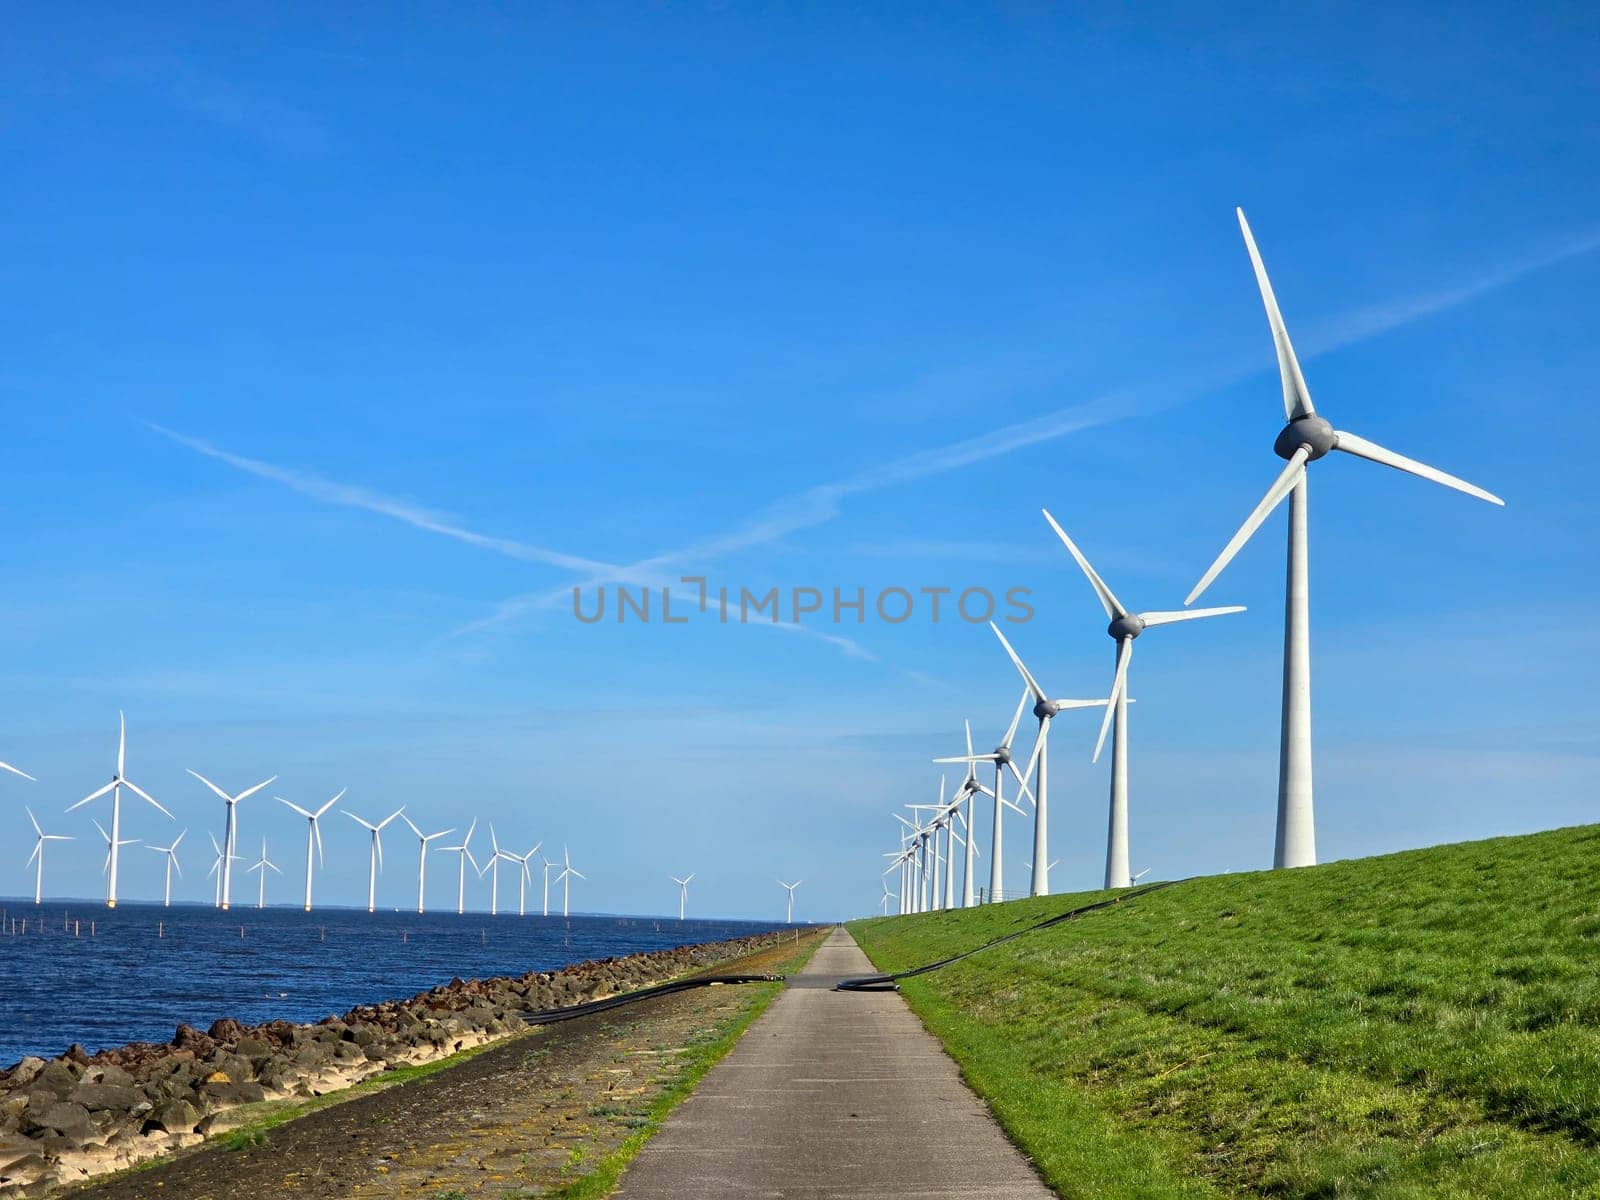 Windmill park in the ocean, view of windmill turbines on a Dutch dike generating green energy electrically, windmills isolated at sea in the Netherlands in Spring